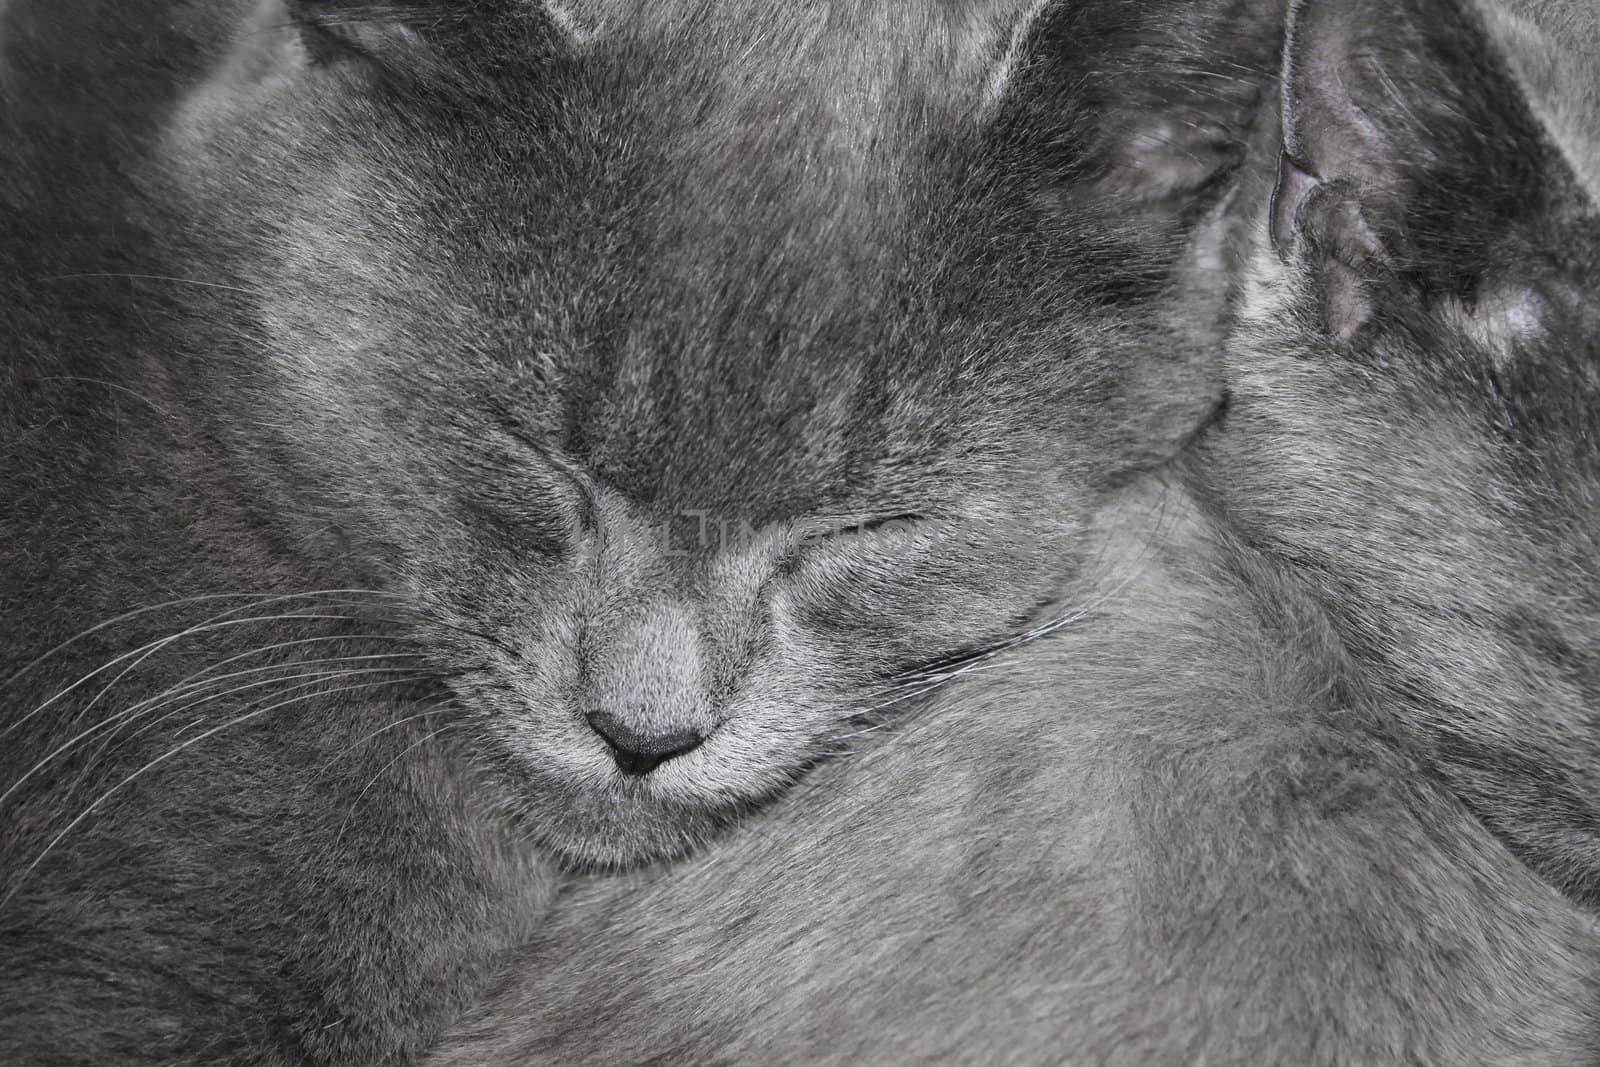 Gray cats are sleeping by qiiip